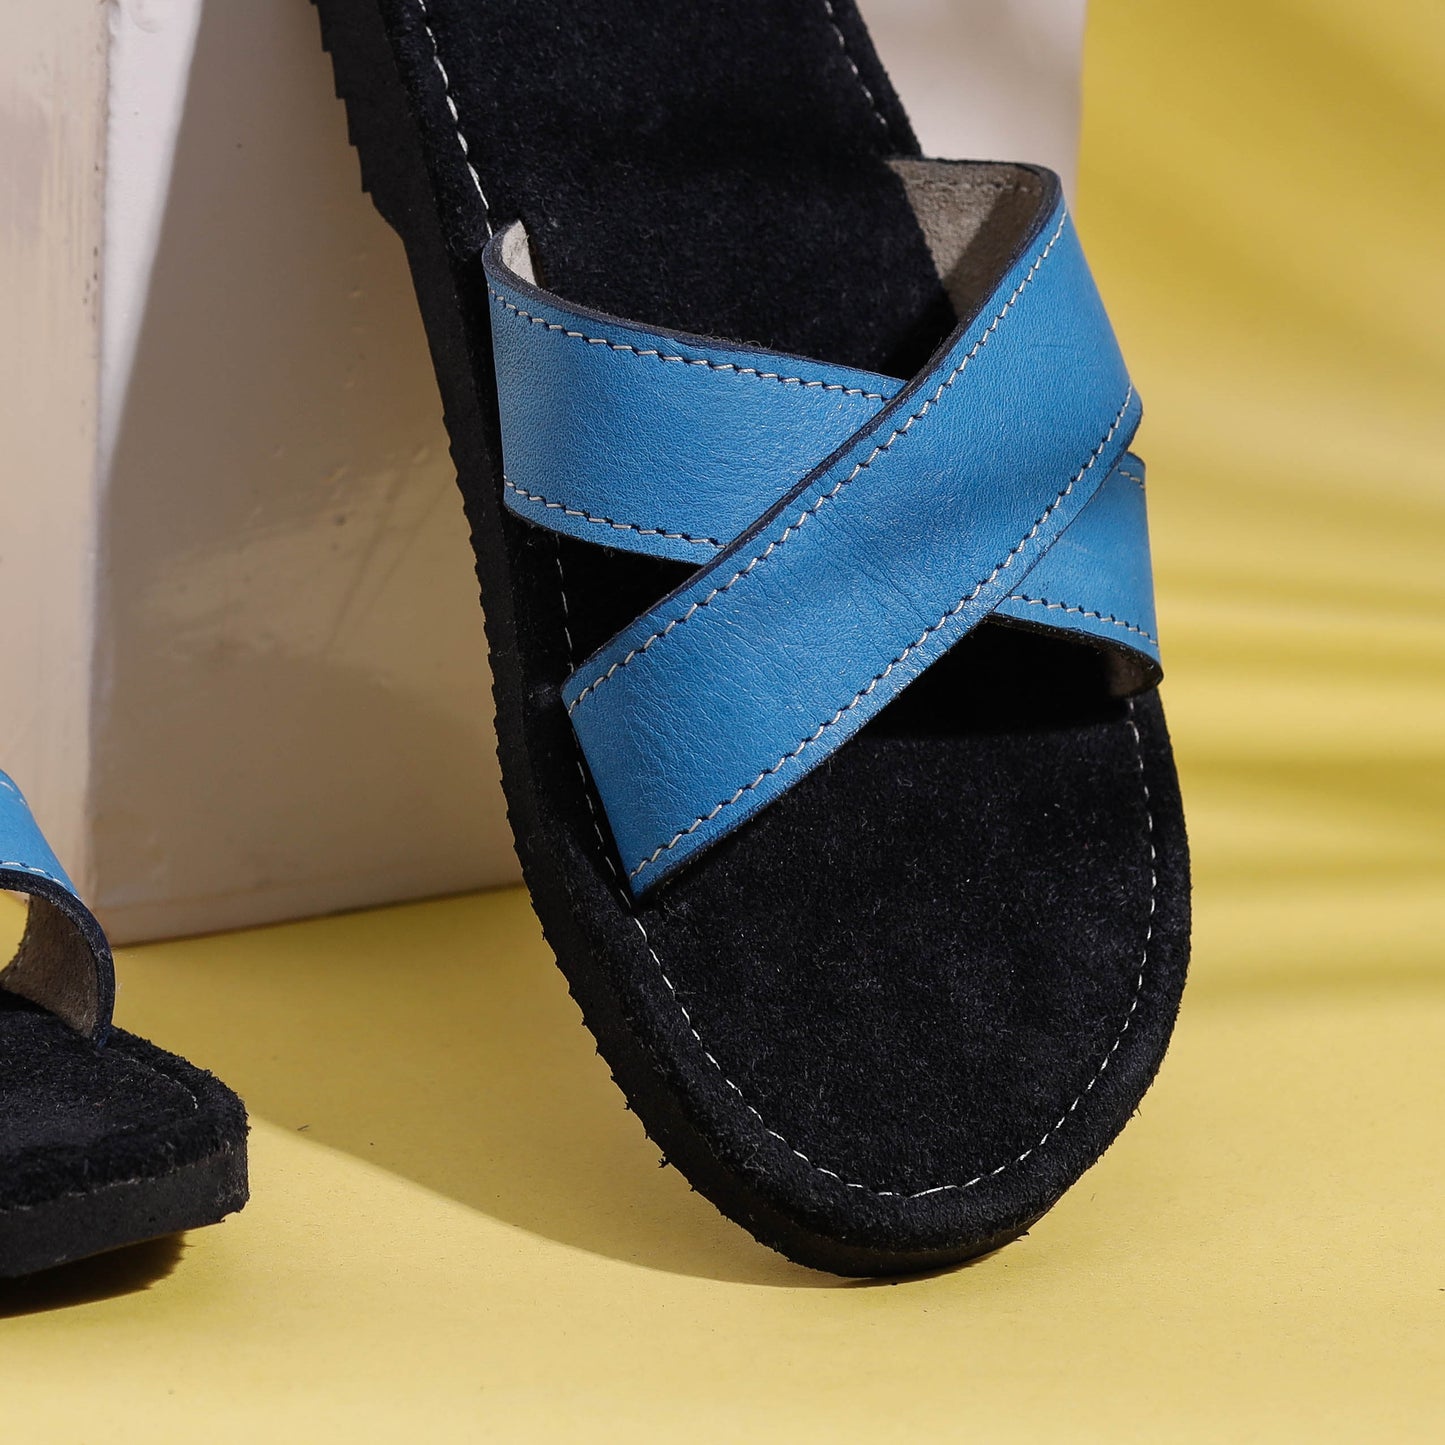 Black & Blue Handcrafted Women's Leather Slippers with Suede